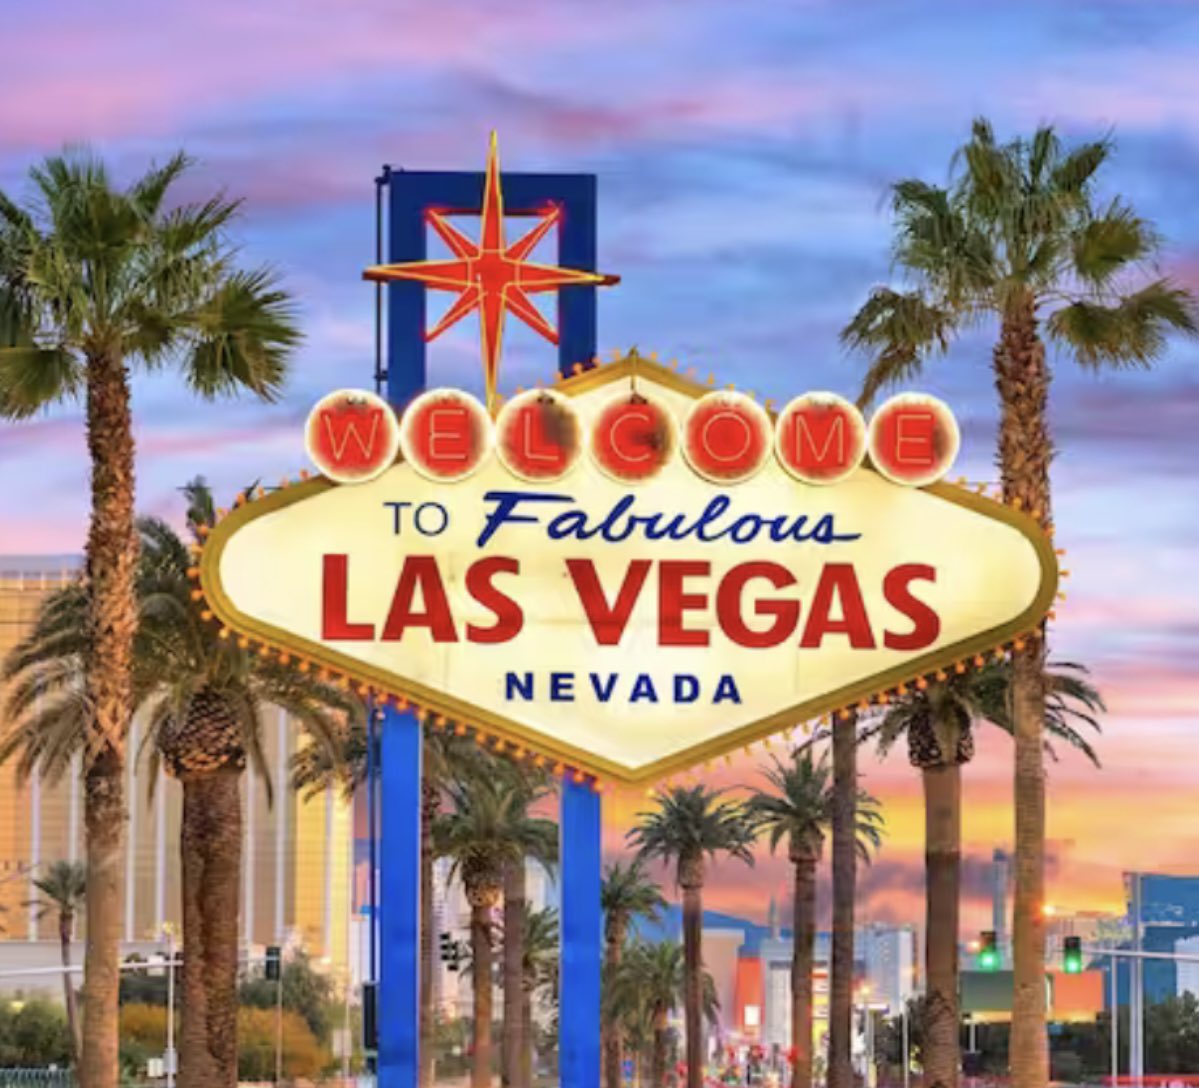 Arrived in Las Vegas, looking forward to @Winmau LAS VEGAS OPEN, well the pairs and triples ( no singles allowed). But still a great trip awaits…. 💪🏆💪